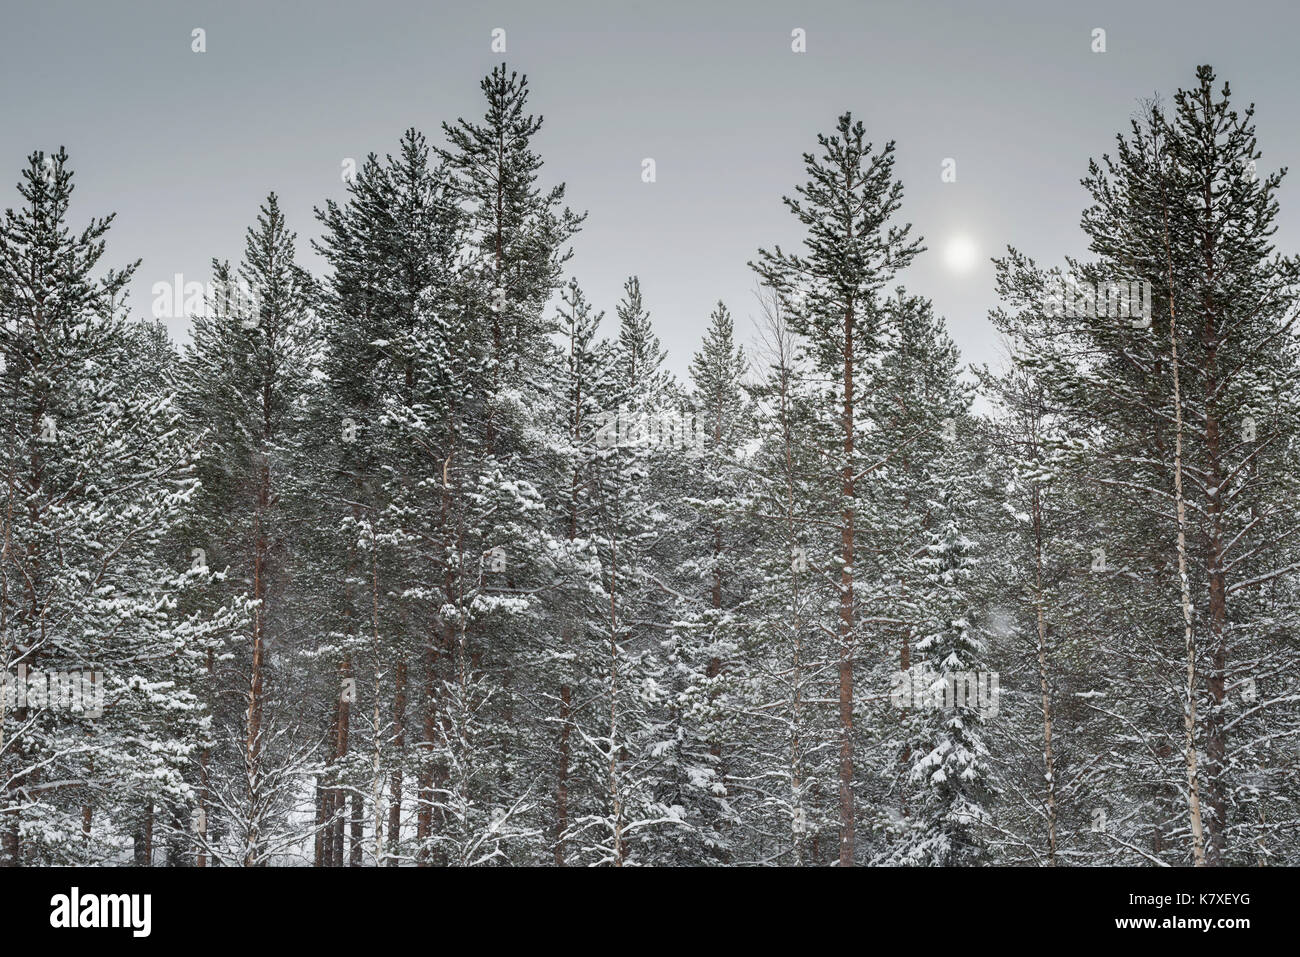 Silver skies and pine treetops, Lapland, Finland Stock Photo